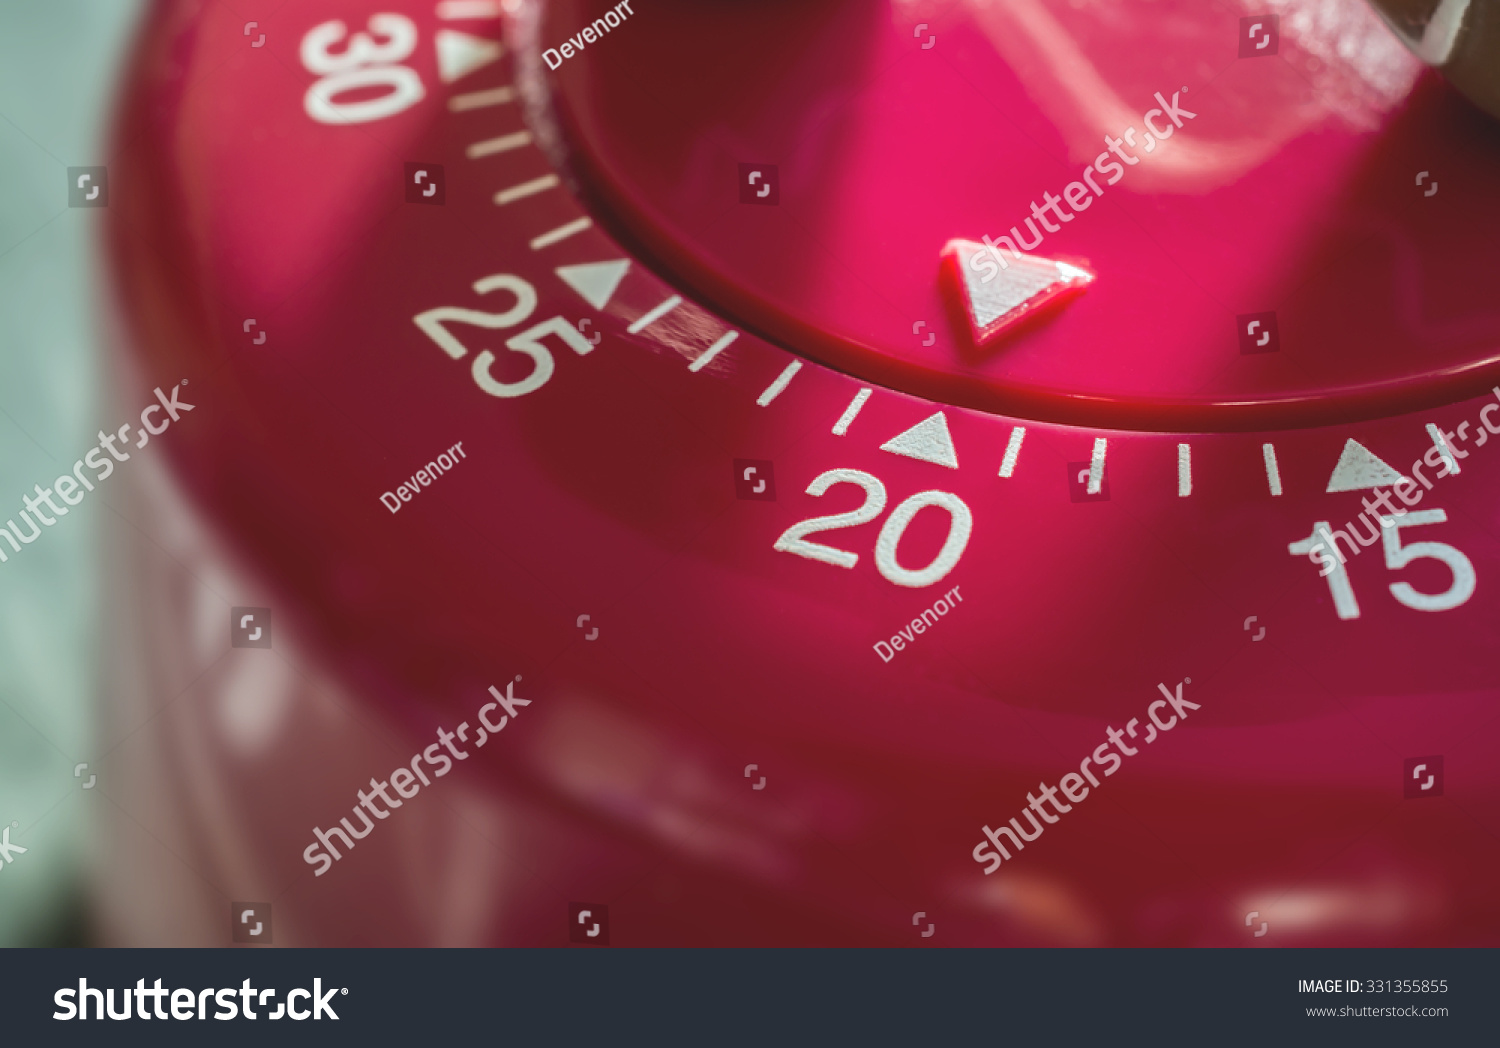 Macro Of A Kitchen Egg Timer - 20 Minutes #331355855